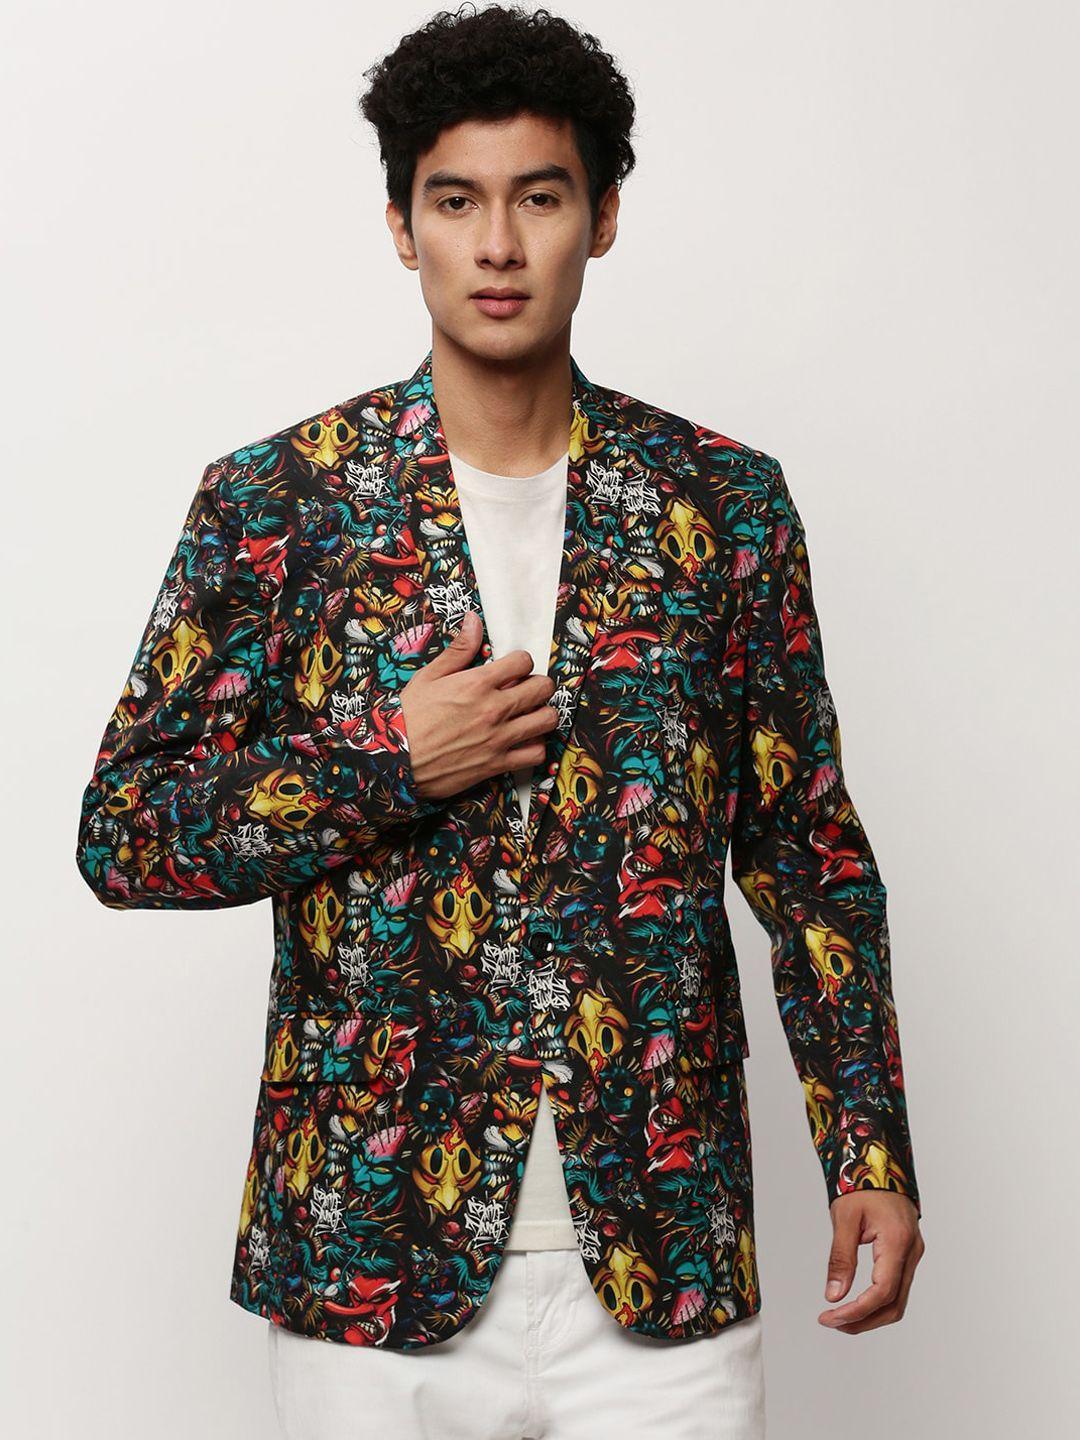 SHOWOFF Graphic Printed Slim-Fit Single Breasted Cotton Blazer